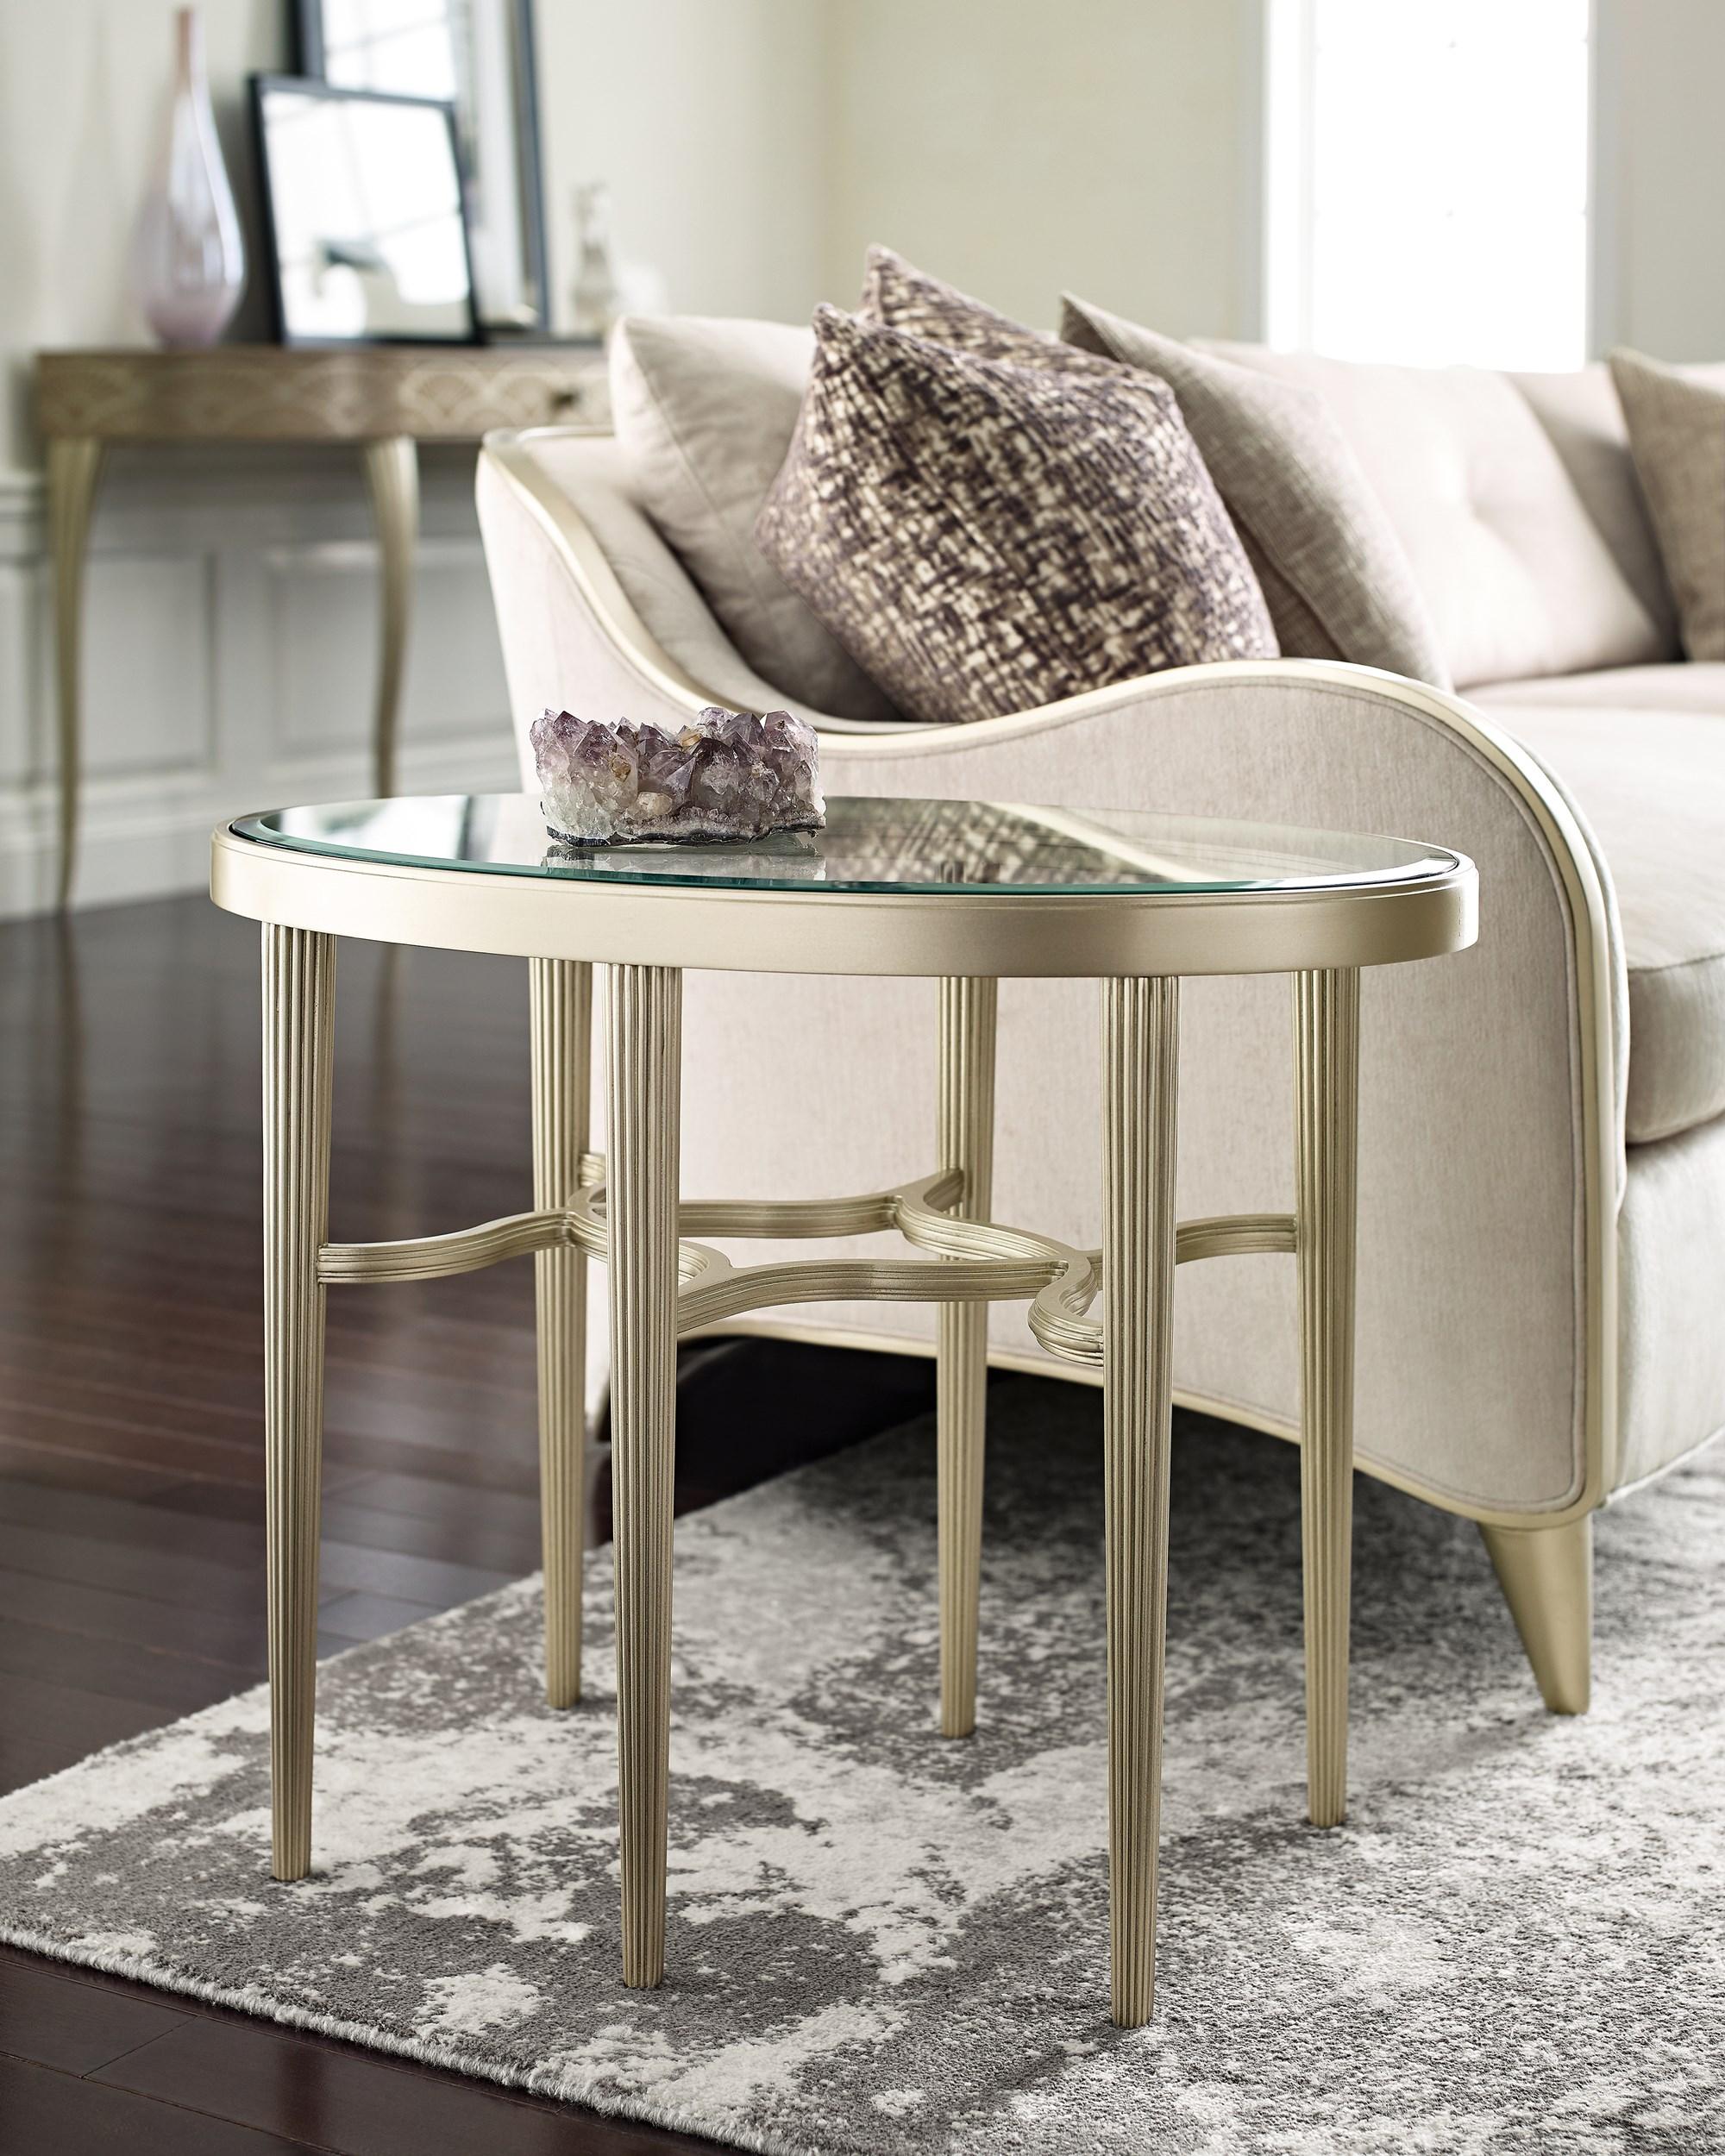 Contemporary End Table LILLIAN C091-020-411 in Taupe, Silver 